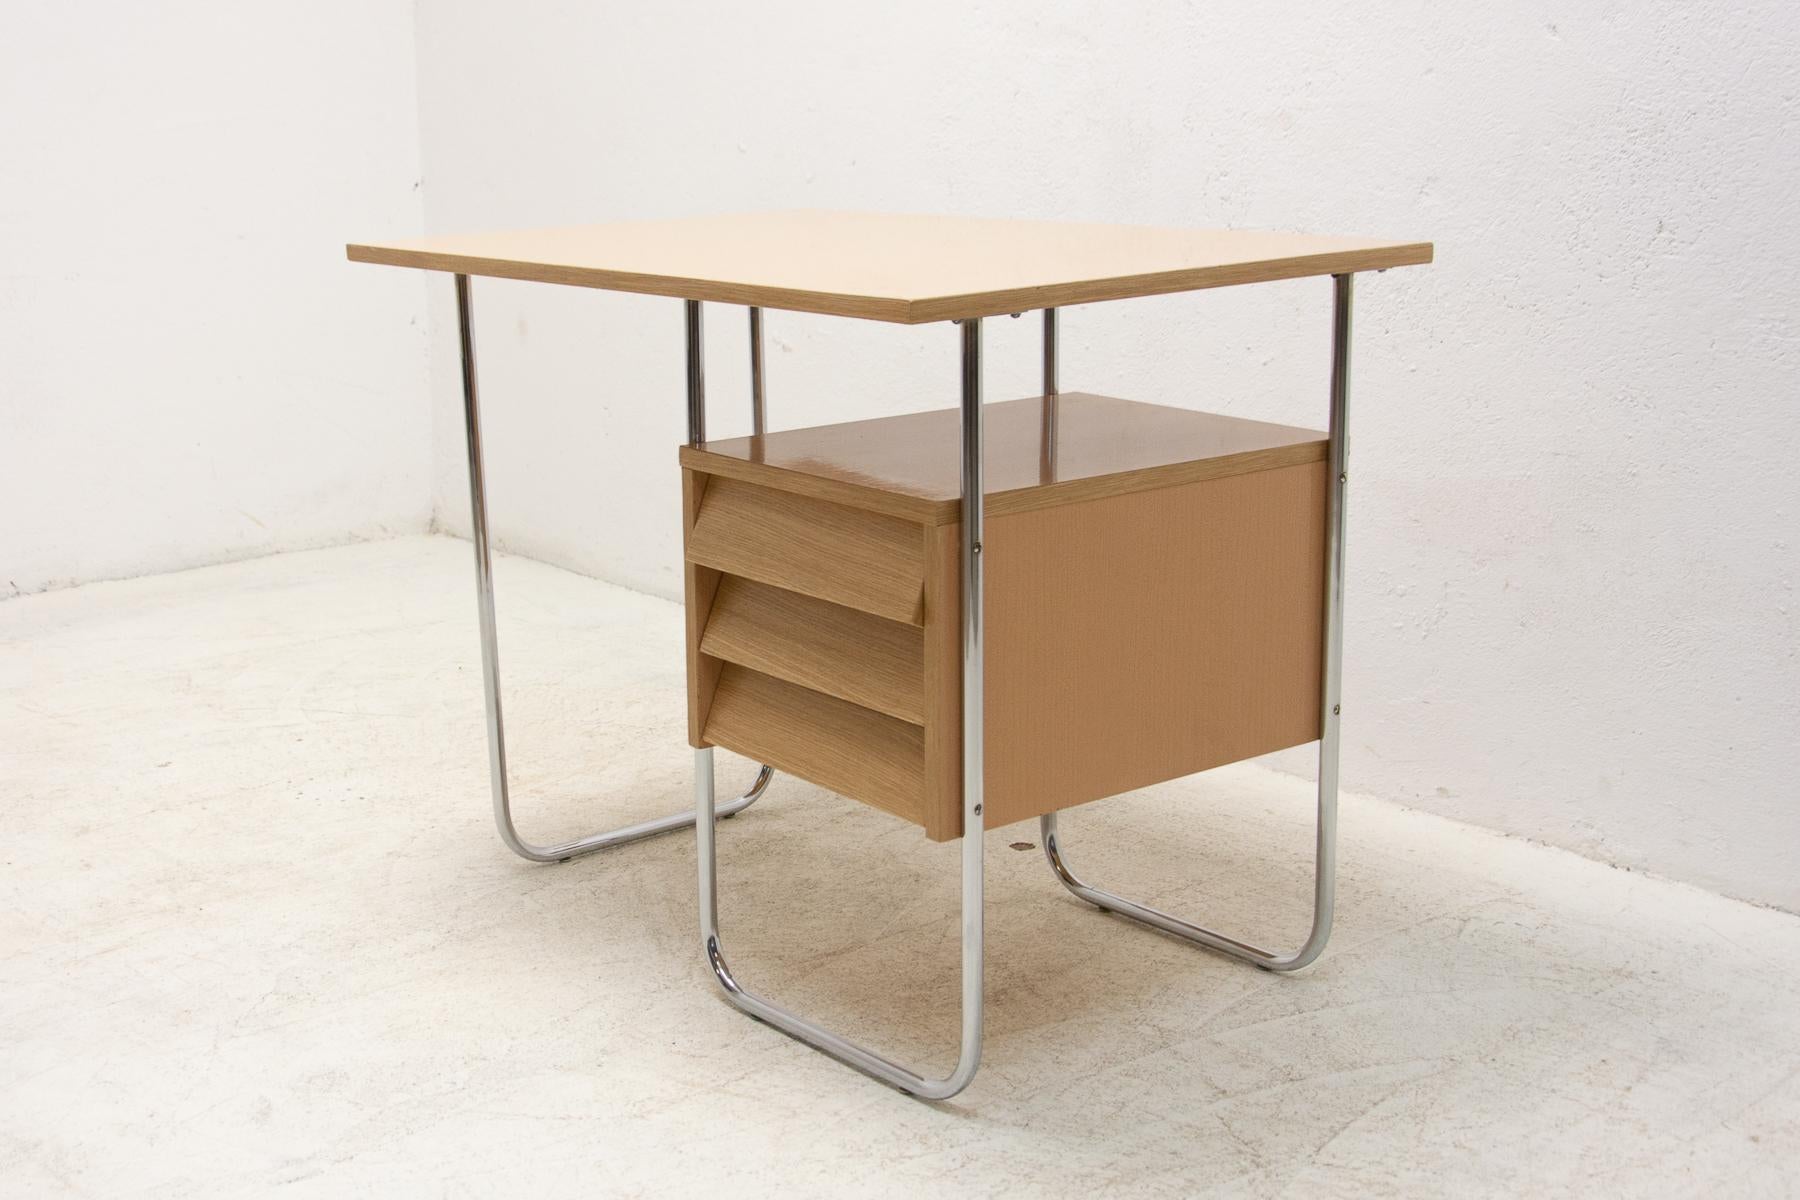 Czechoslovak Midcentury Chrome and Formica Writing Desk, 1950s, Czechoslovakia In Good Condition For Sale In Prague 8, CZ